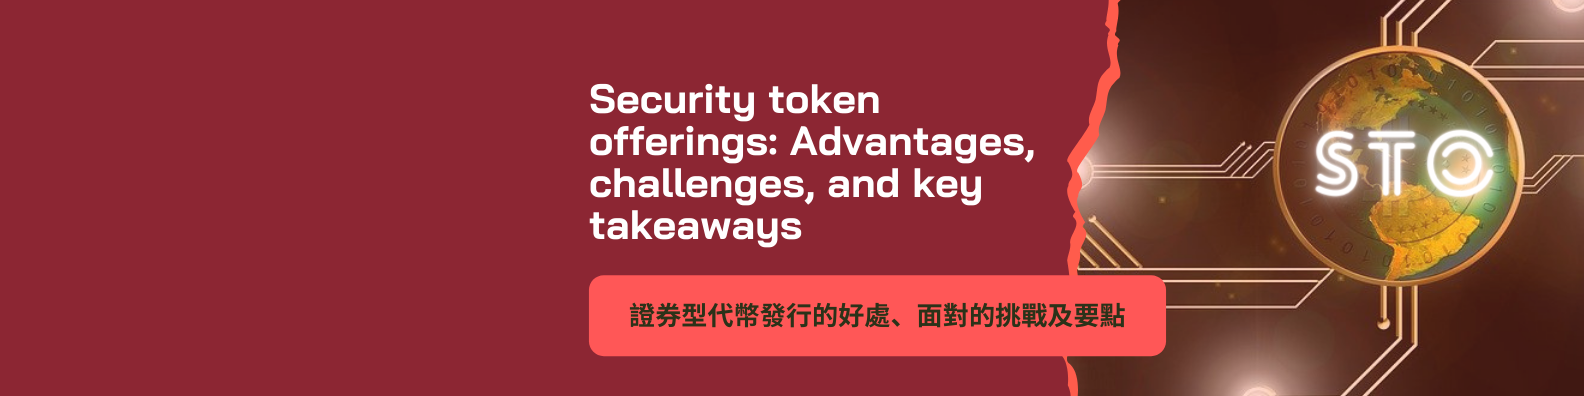 Security token offerings: Advantages, challenges, and key takeaways